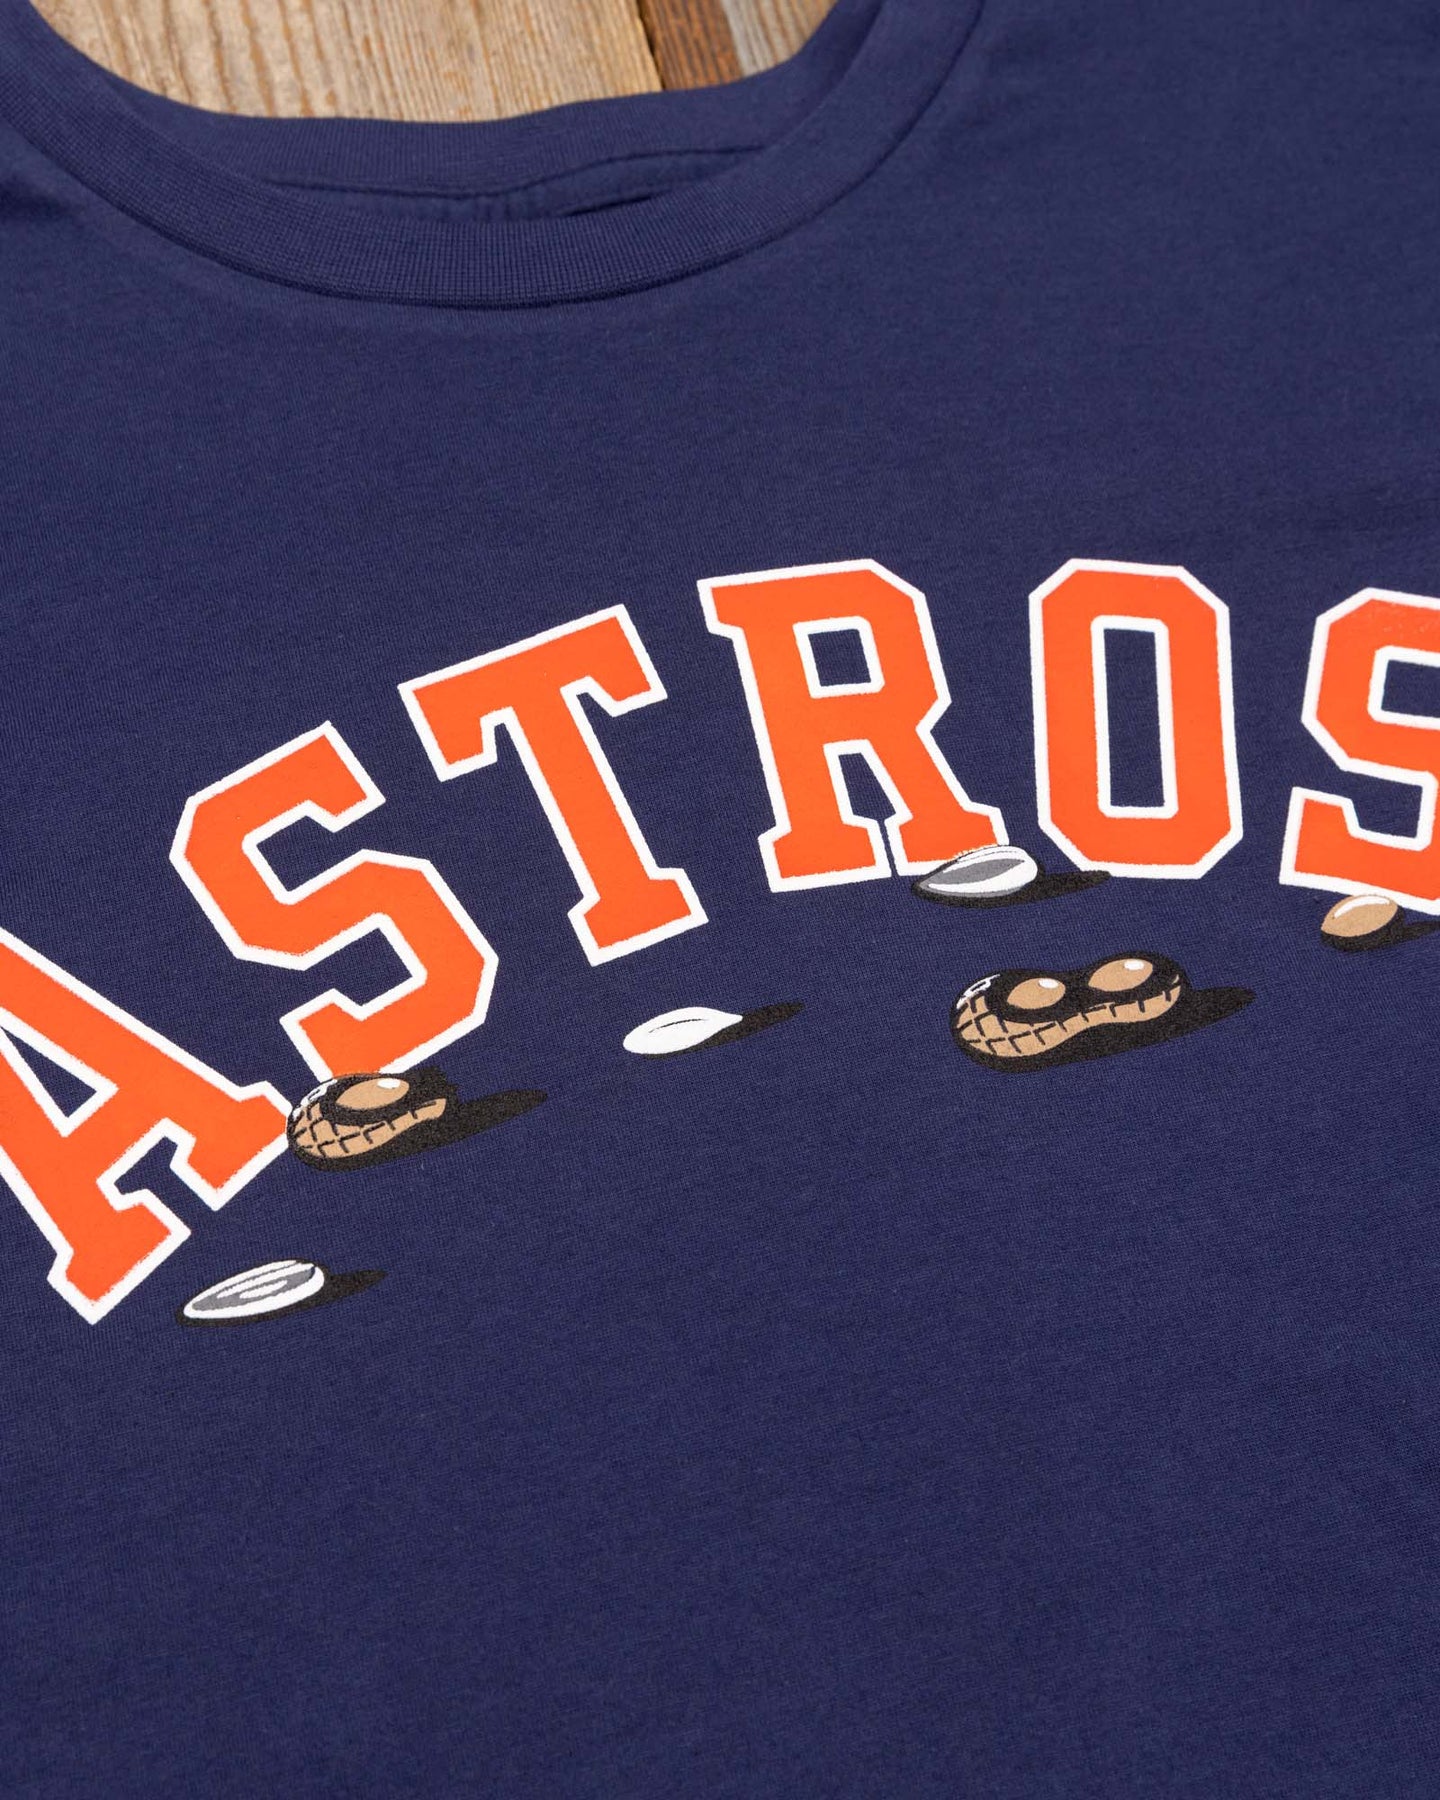 Peanuts Funny Houston Astros Shirts, Houston Astros Christmas Gifts - Happy  Place for Music Lovers